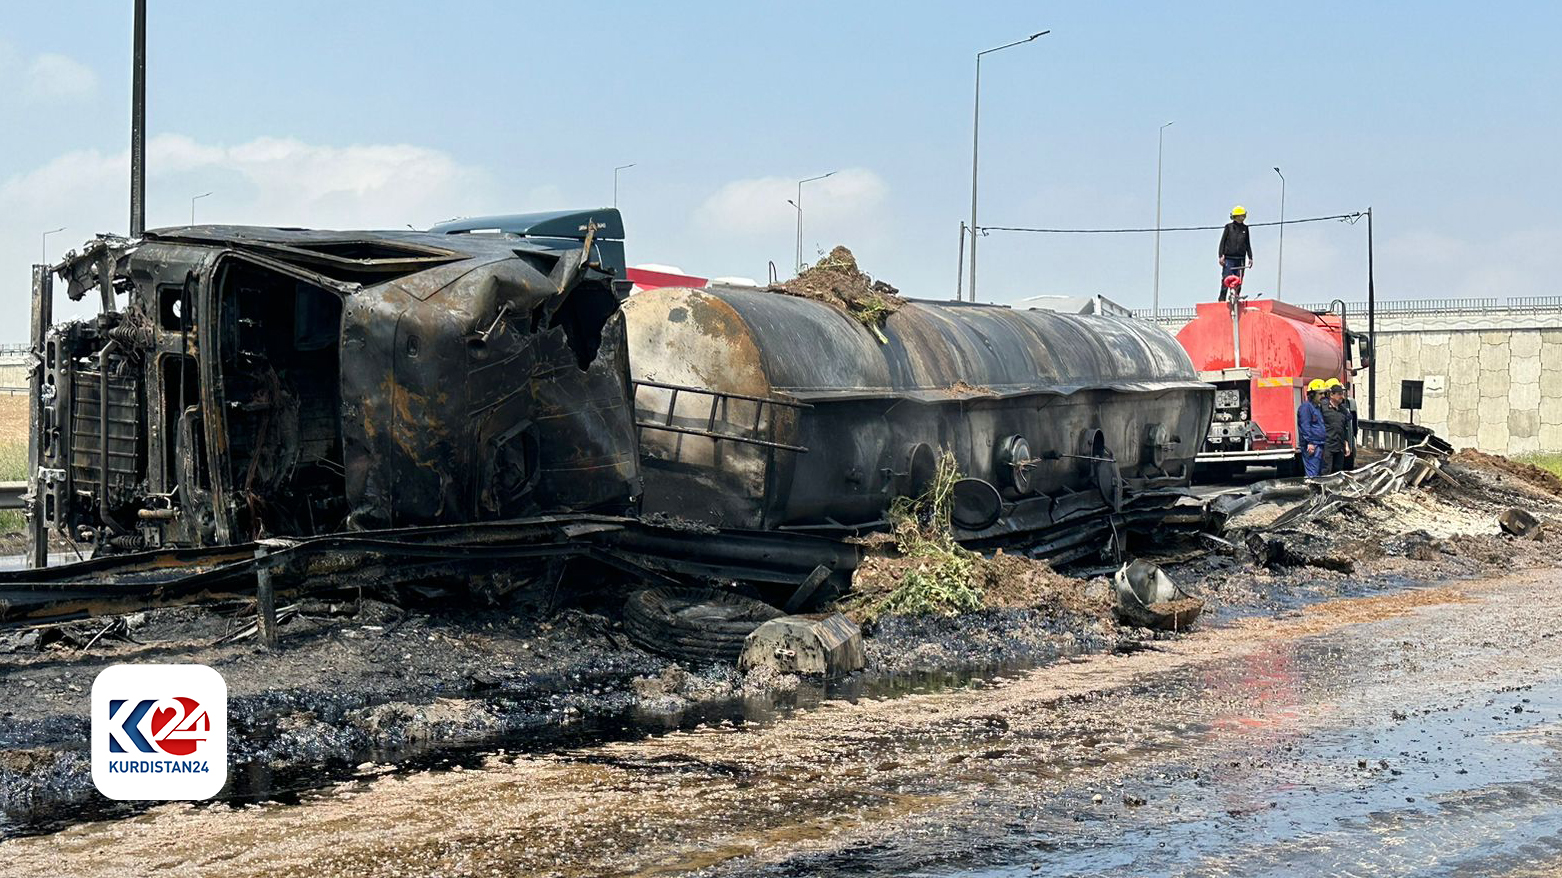 The photo of the burned tanker following the incident. (Photo: Kurdistan 24)